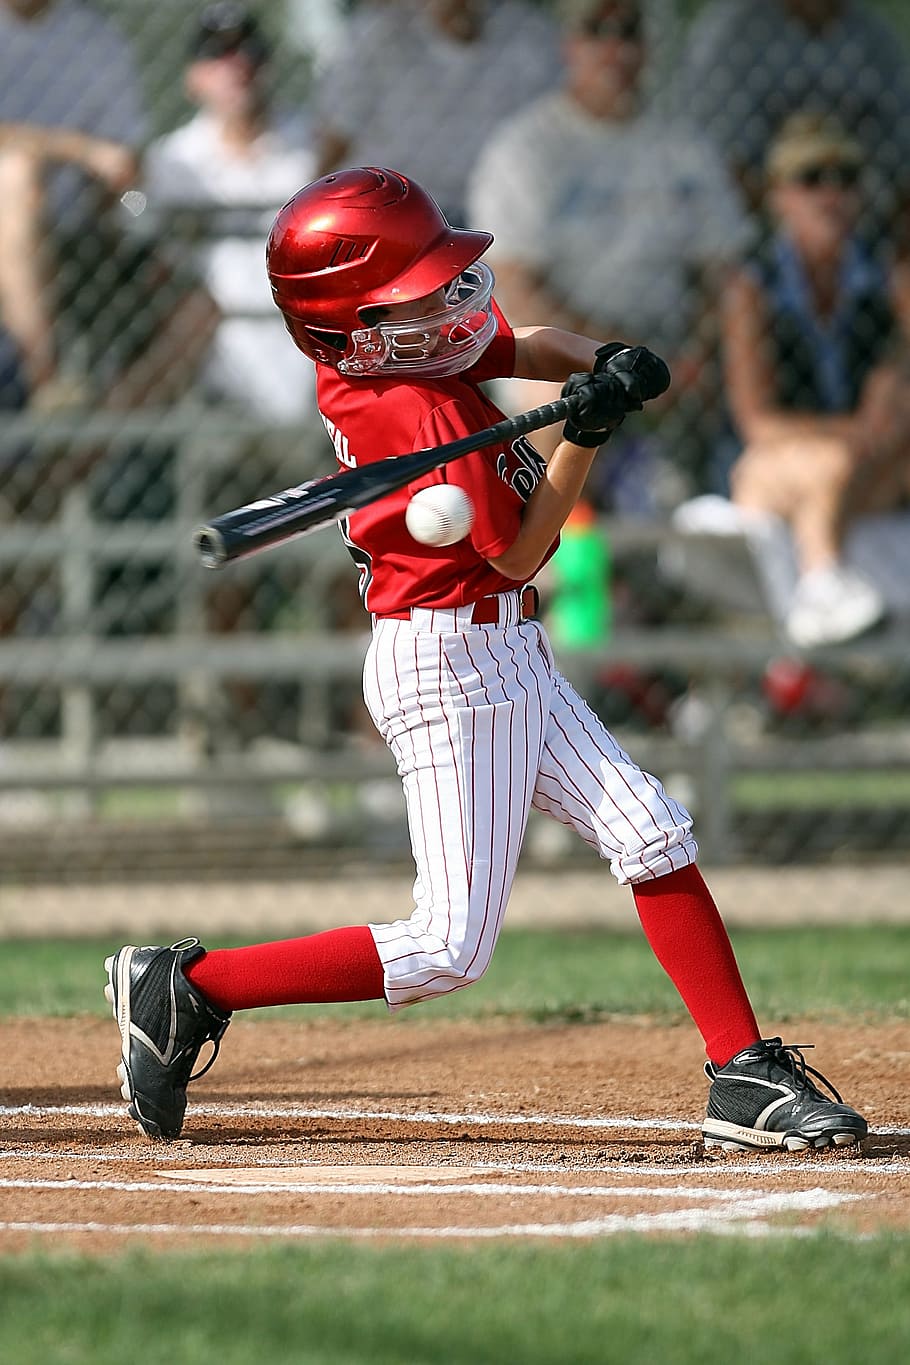 Little League Baseball Player At The Plate, Swinging The Baseball Bat From  Behind. Stock Photo, Picture and Royalty Free Image. Image 52153964.